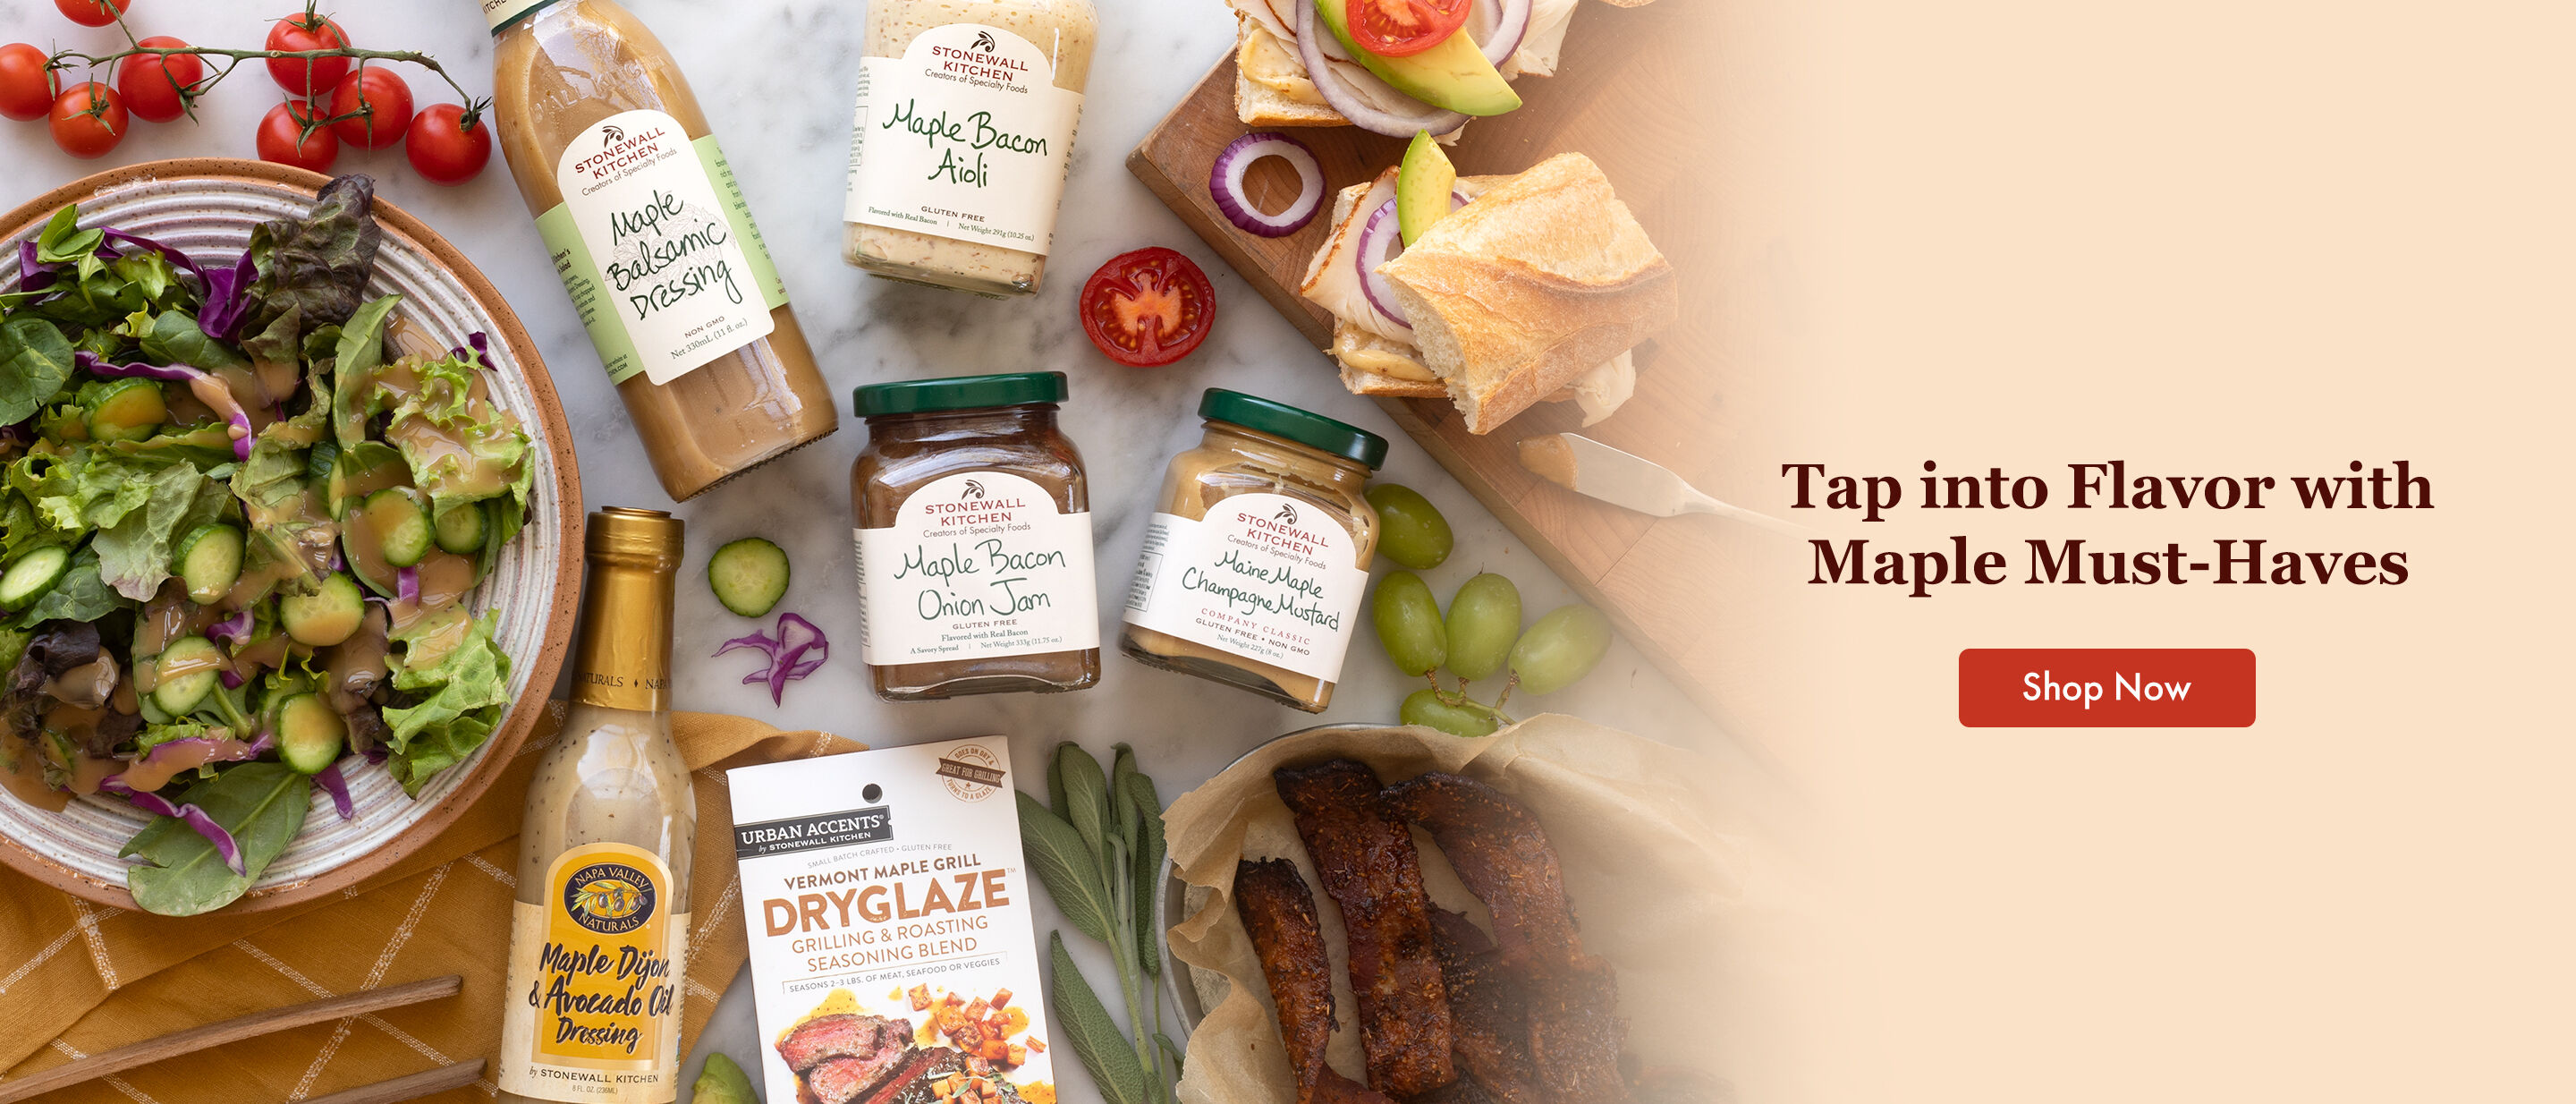 Tap into Flavor with Maple Must-Haves - Shop Now